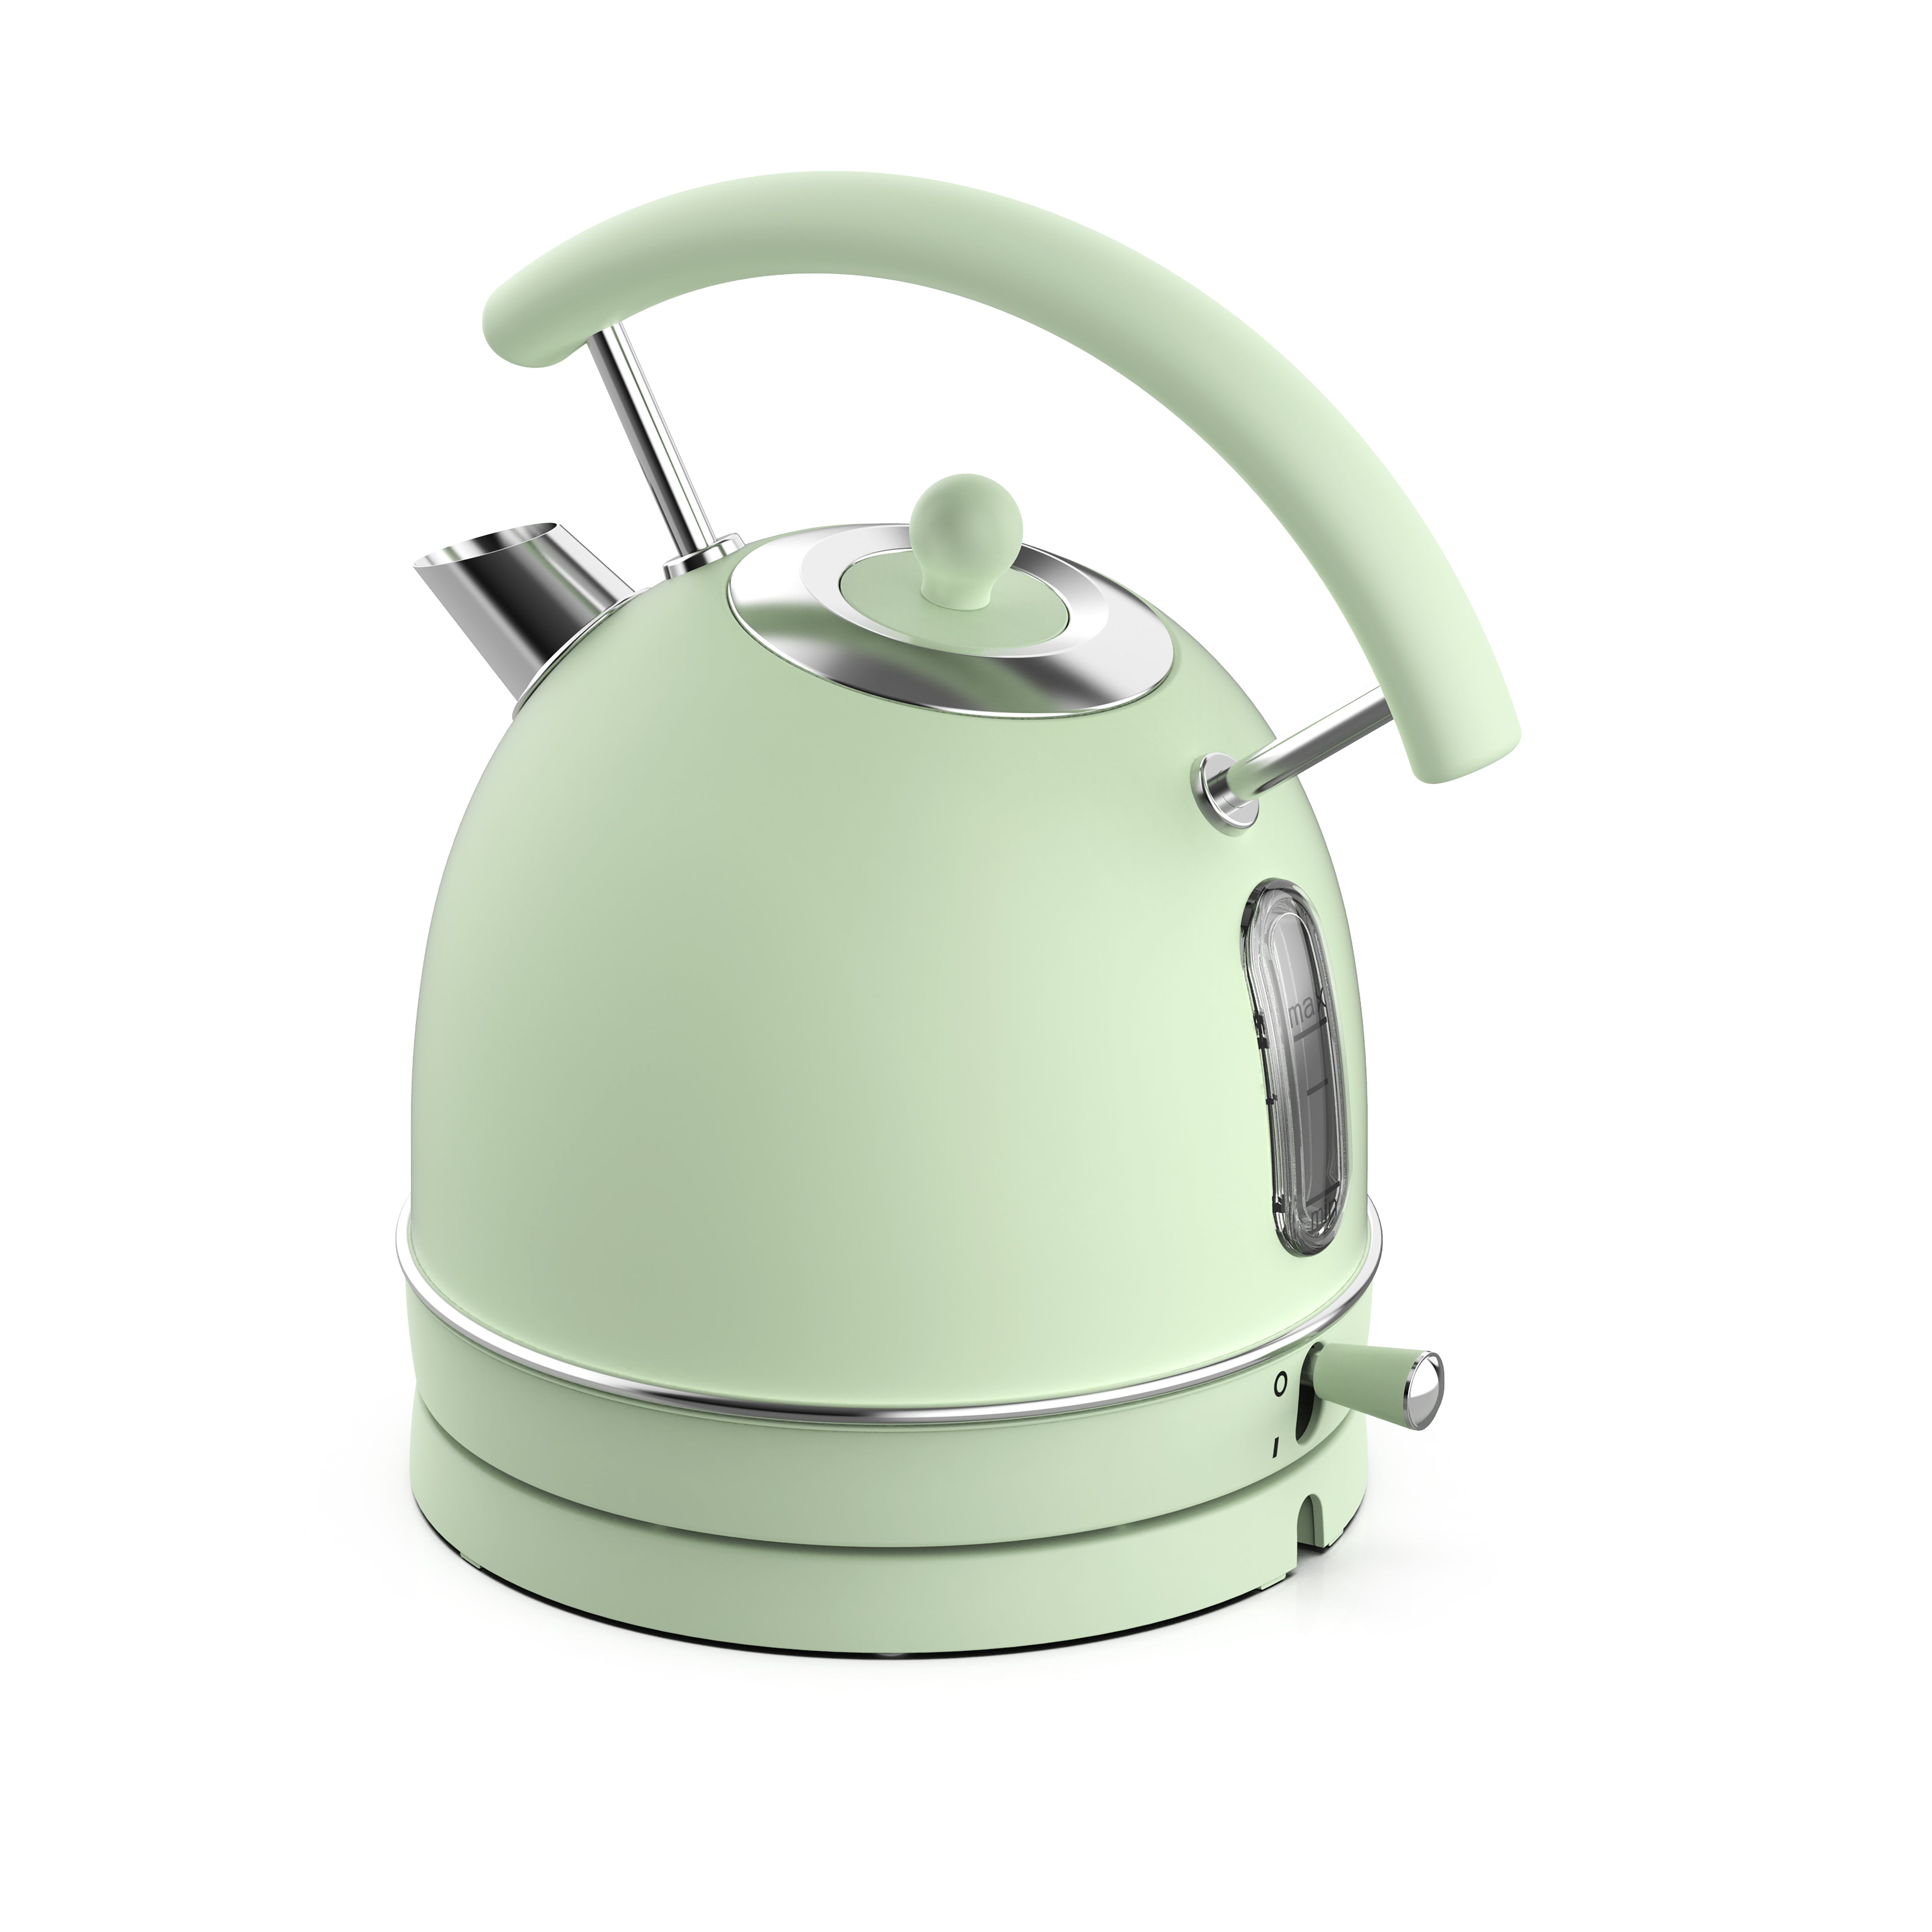 Electric Water Kettle, 1.7L, Green